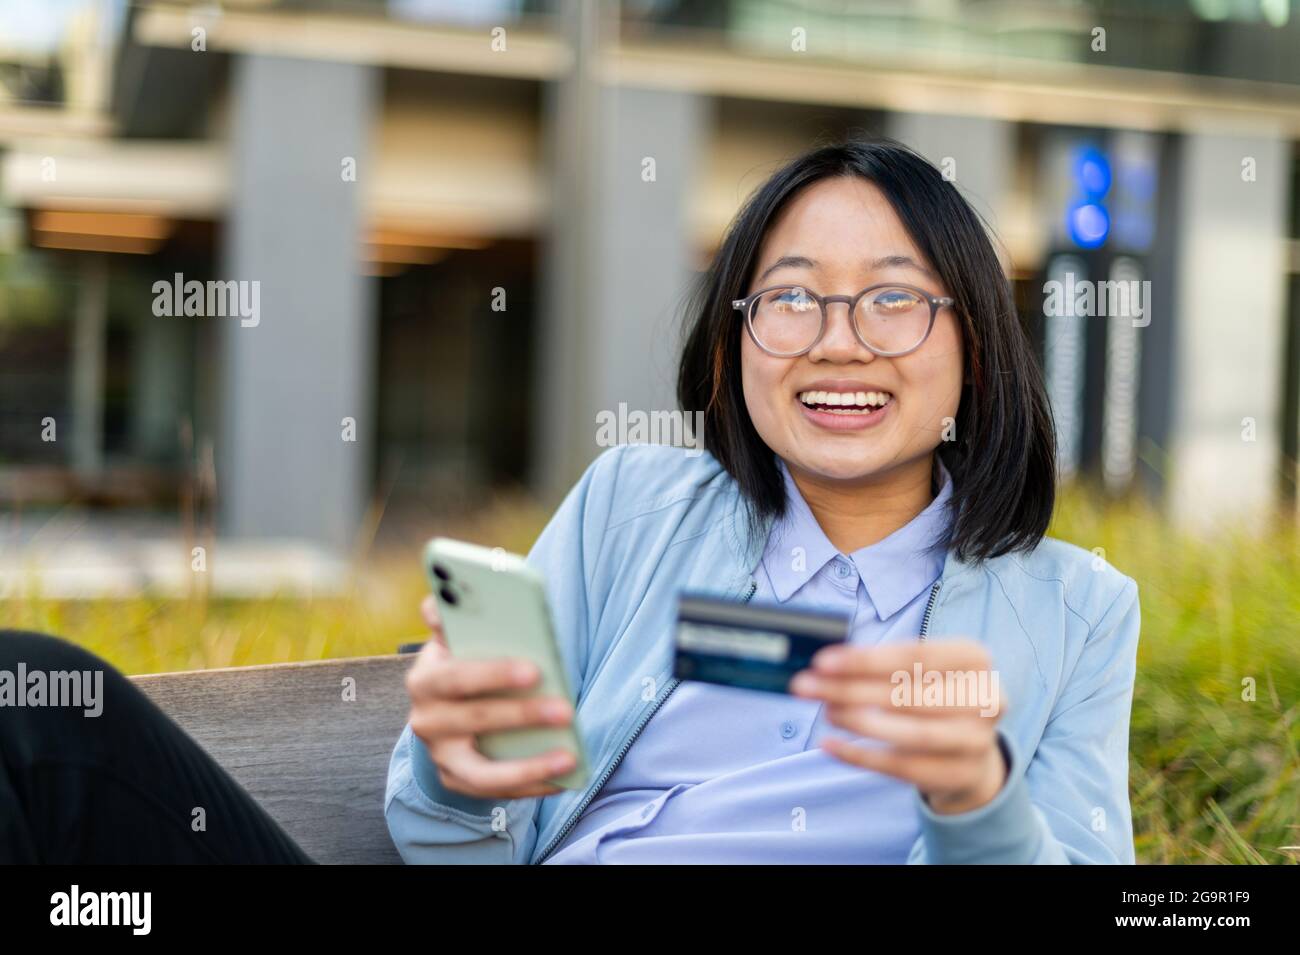 Young woman looking at camera holding credit card and cell phone Stock Photo